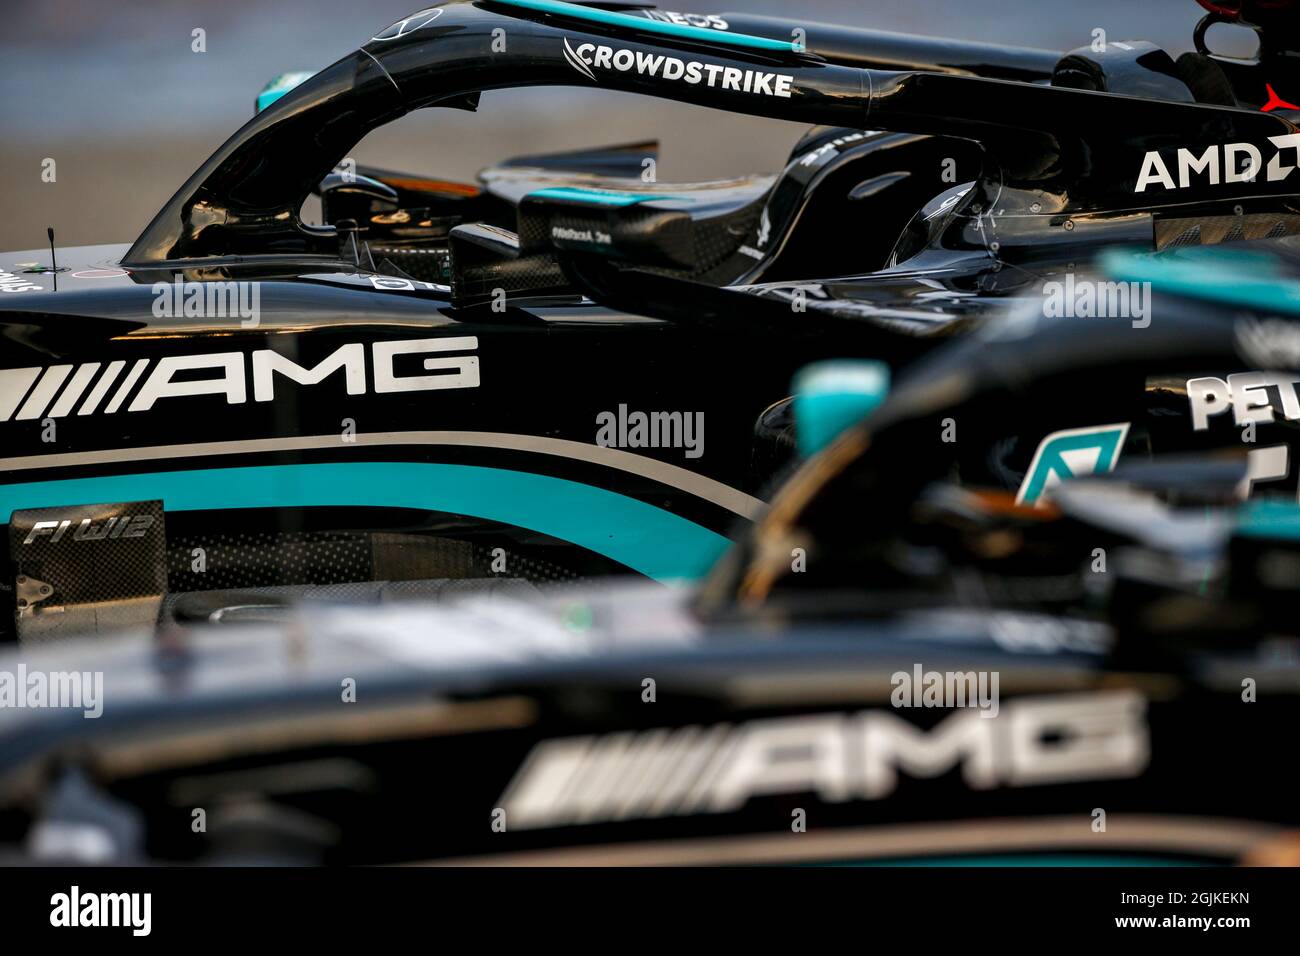 Monza, Italy. 10th Sep, 2021. Mercedes-AMG F1 W12 E Performance, F1 Grand Prix of Italy at Autodromo Nazionale Monza on September 10, 2021 in Monza, Italy. (Photo by HOCH ZWEI) Credit: dpa/Alamy Live News Stock Photo